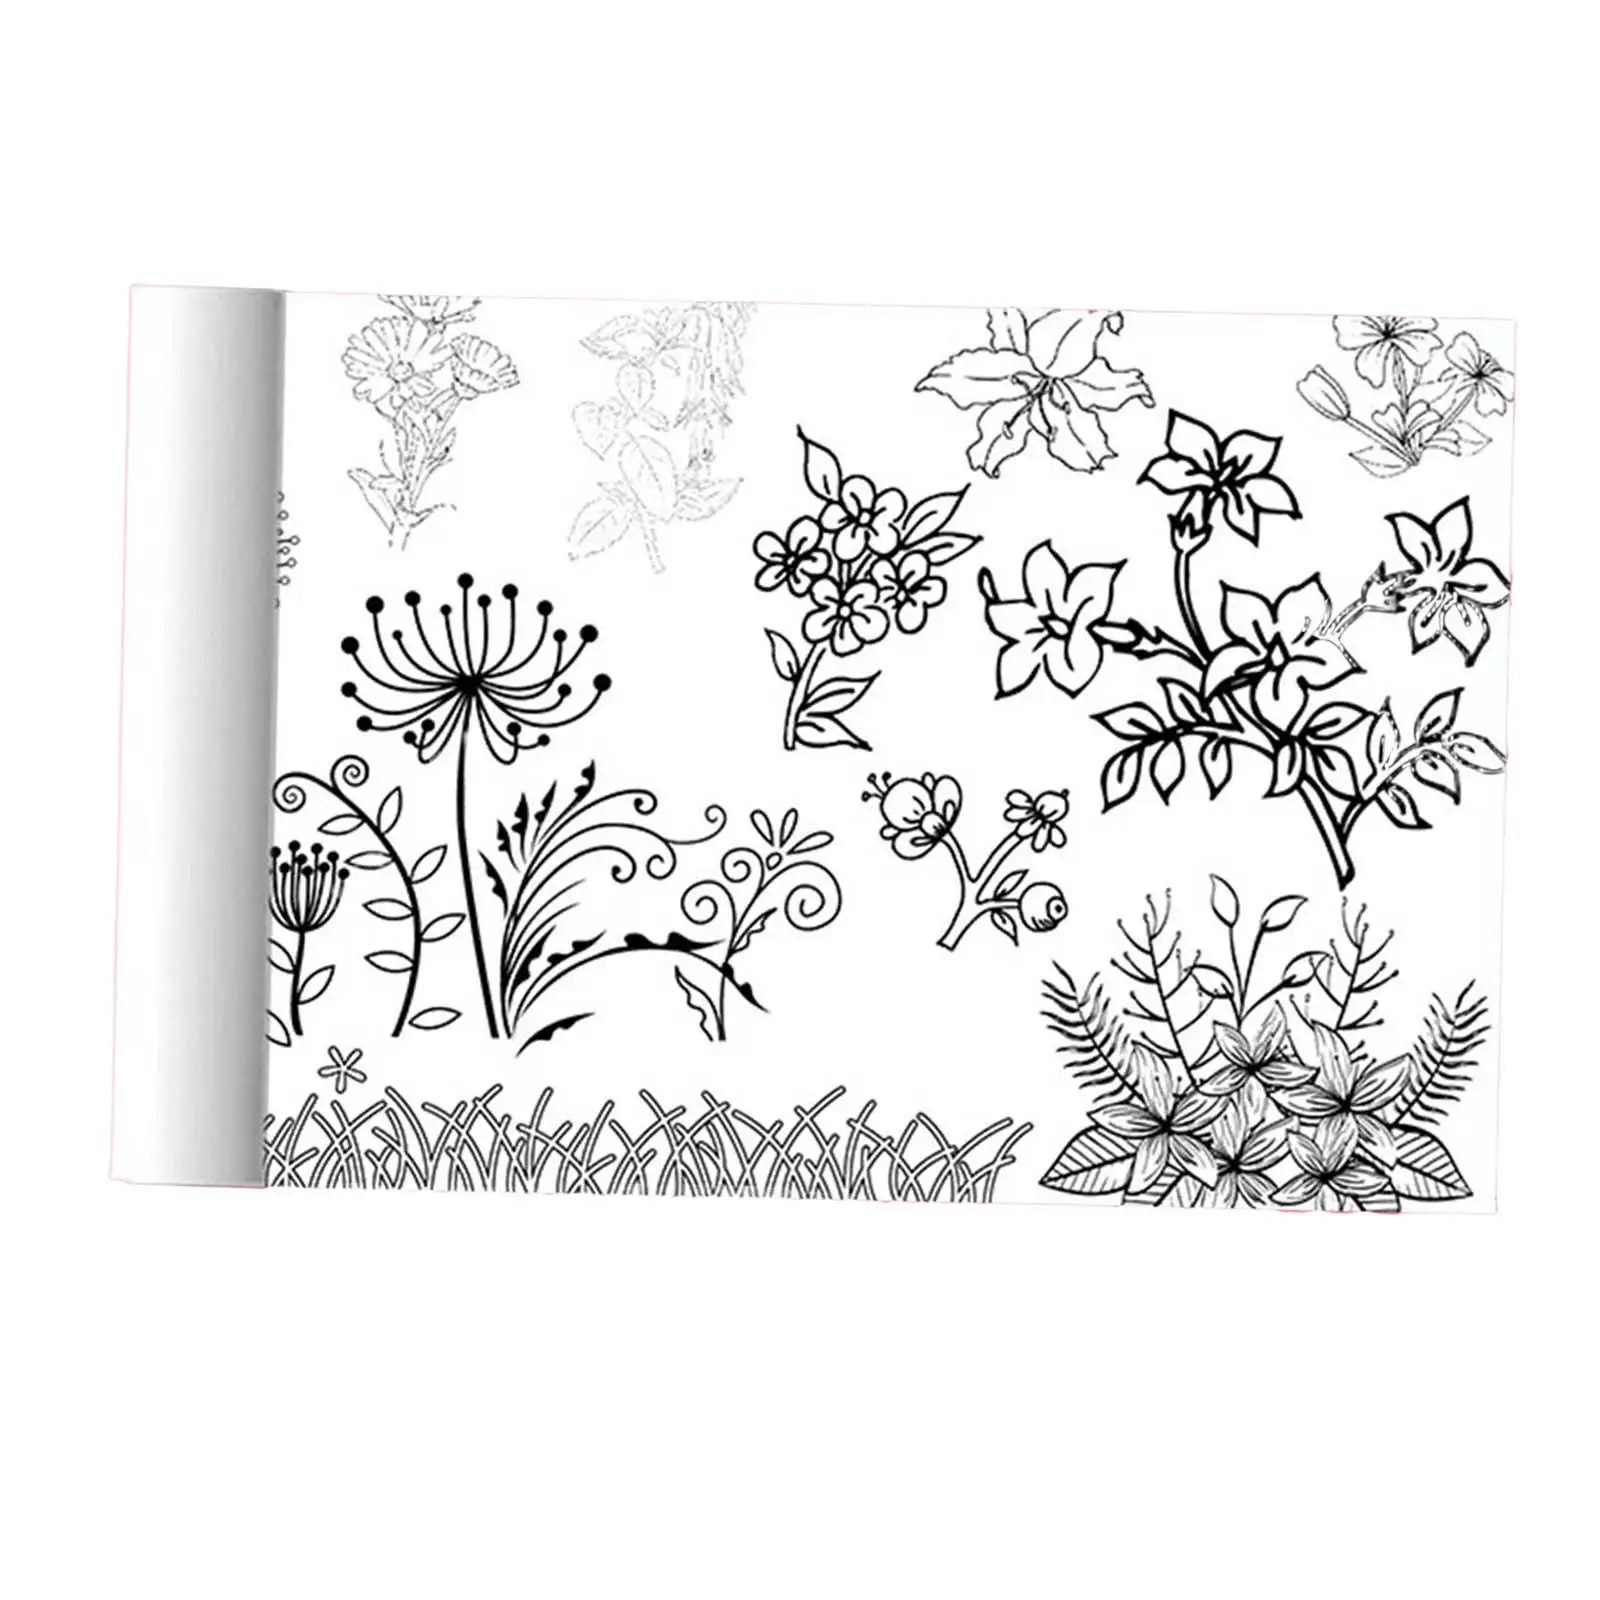 Coloring Paper Roll Coloring Books Coloring Tablecloth Wall Coloring Sheets